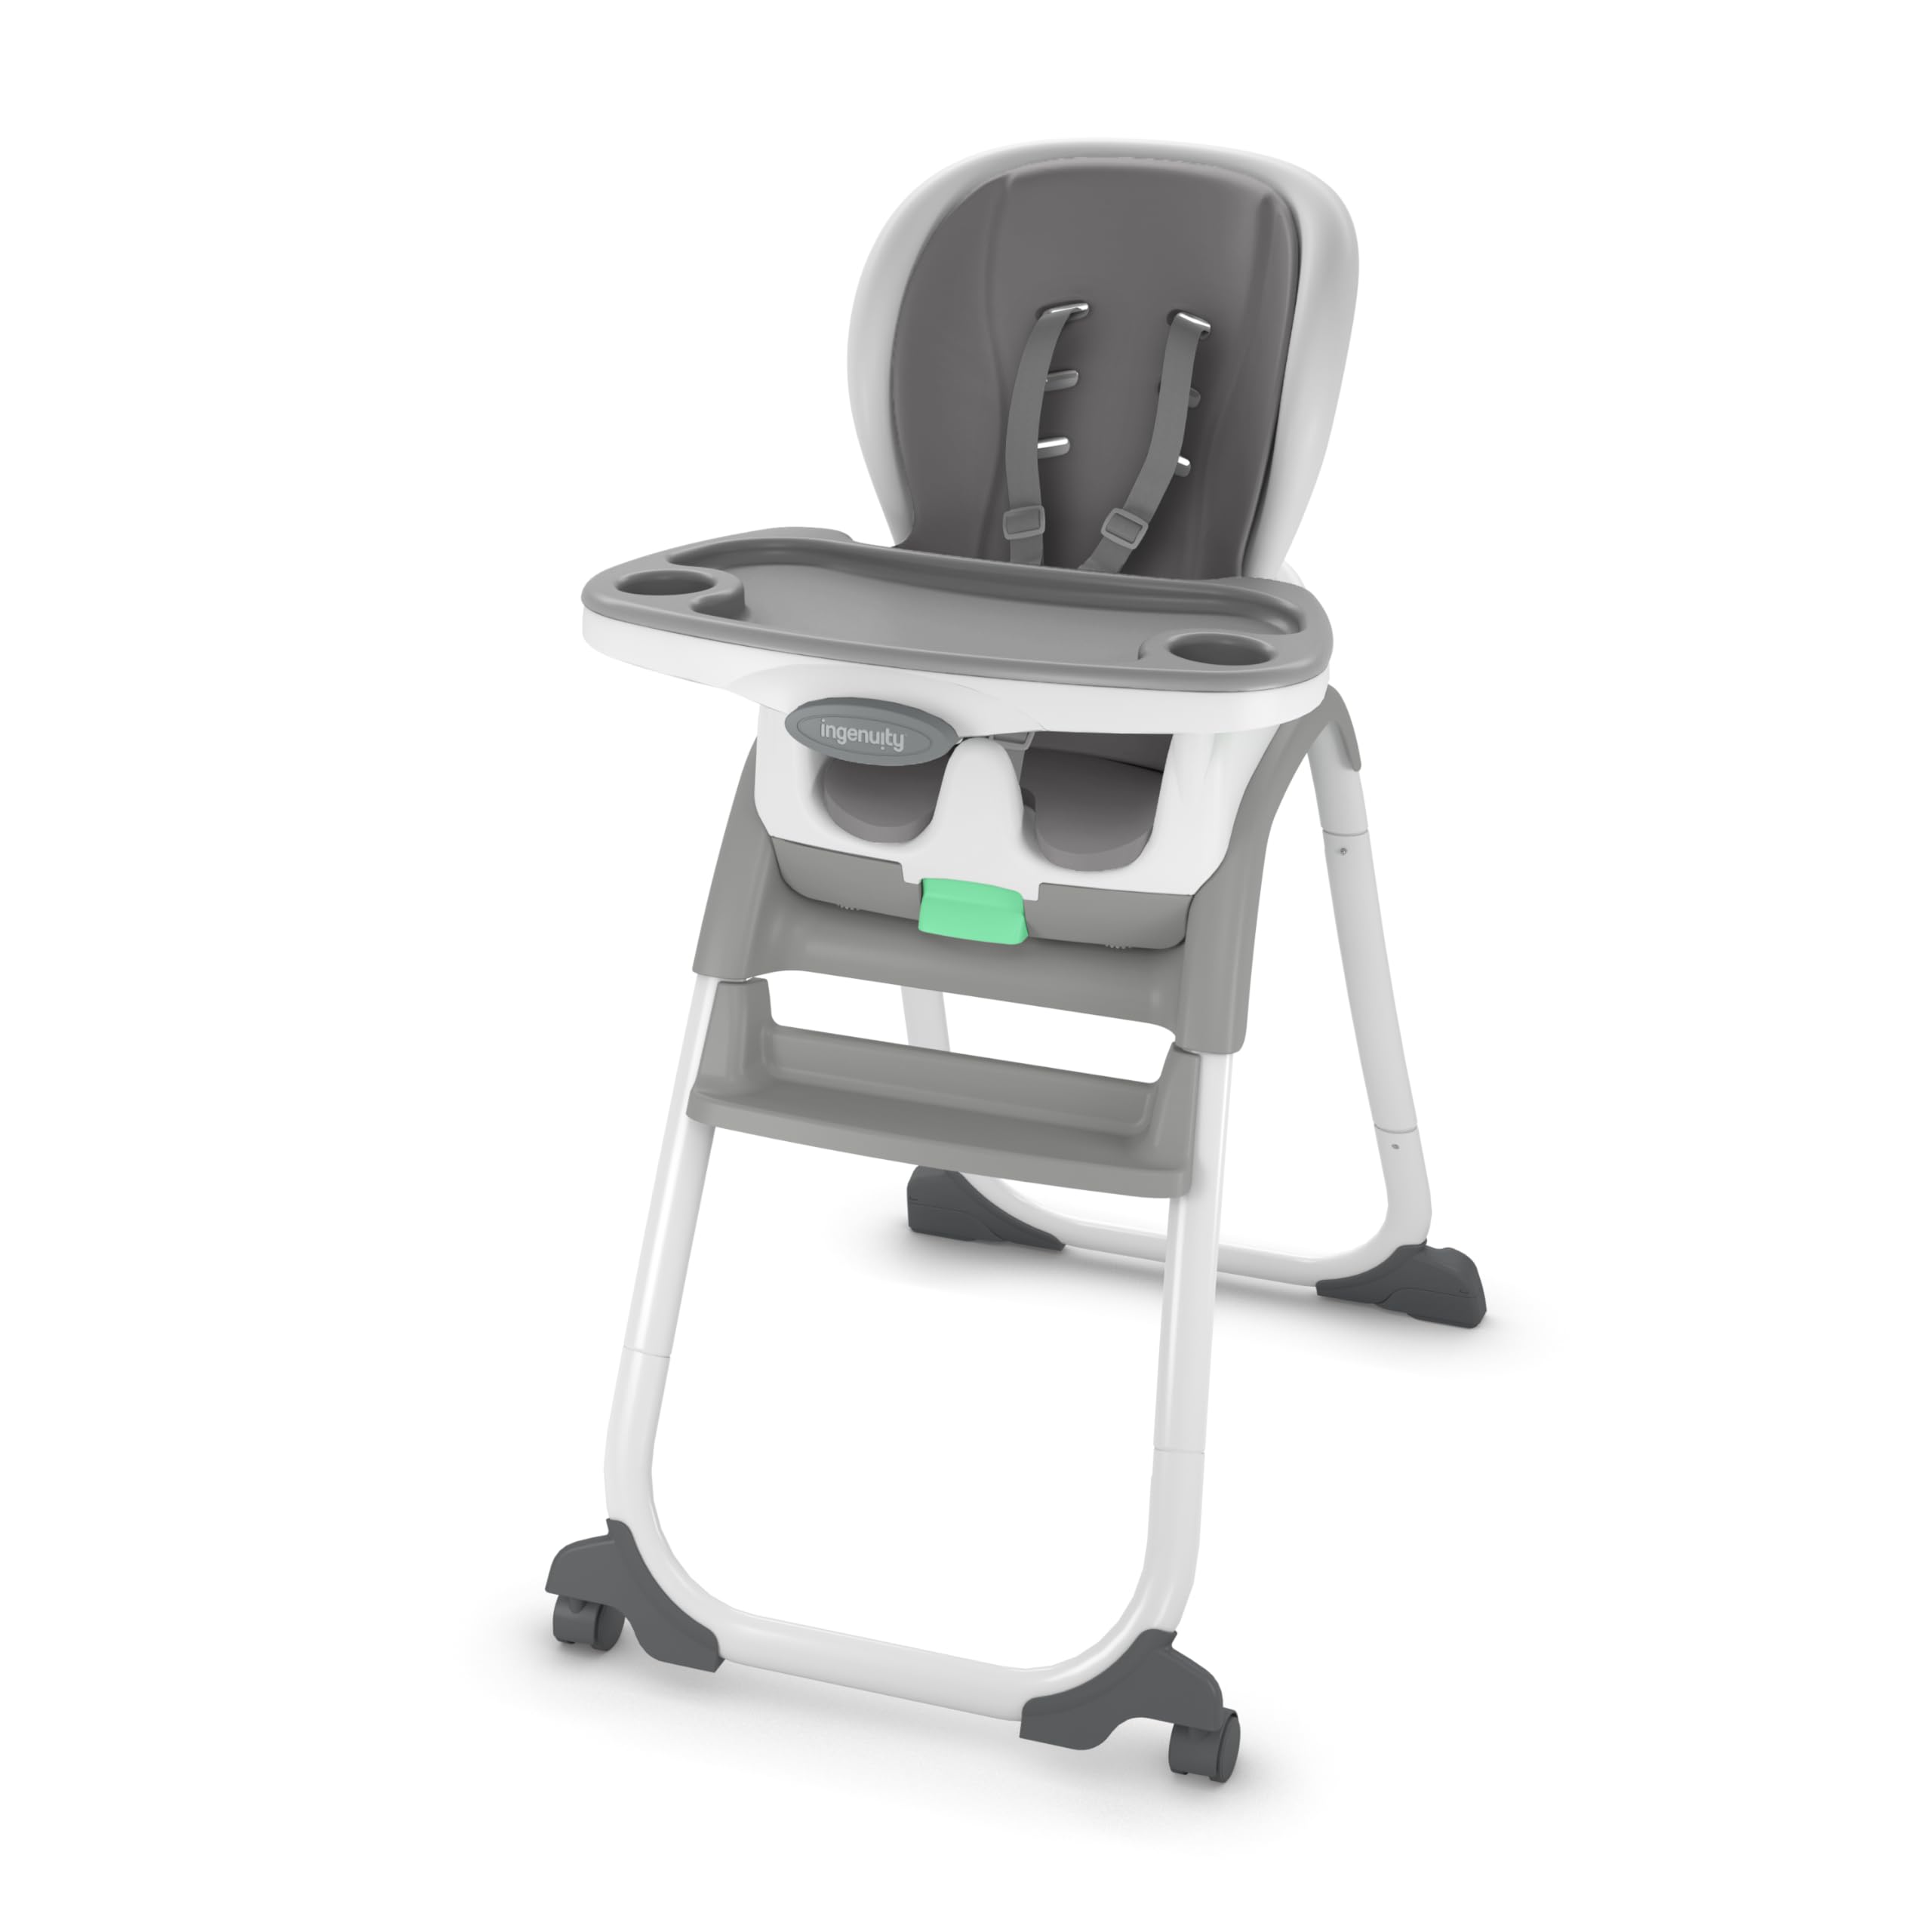 6-in-1 Ingenuity Full Course SmartClean Convertible High Chair w/ 6 Modes & 2 Dishwasher Safe Trays (Slate) $70 + Free Shipping